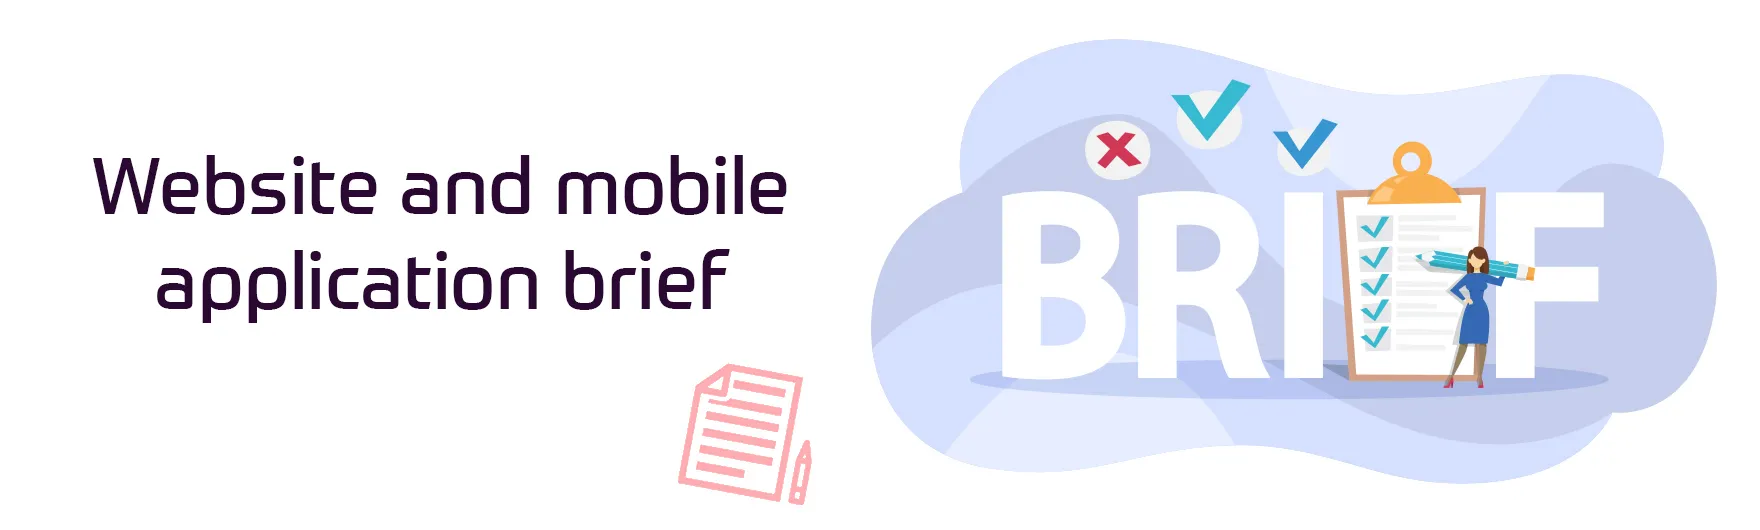 Website and mobile application brief